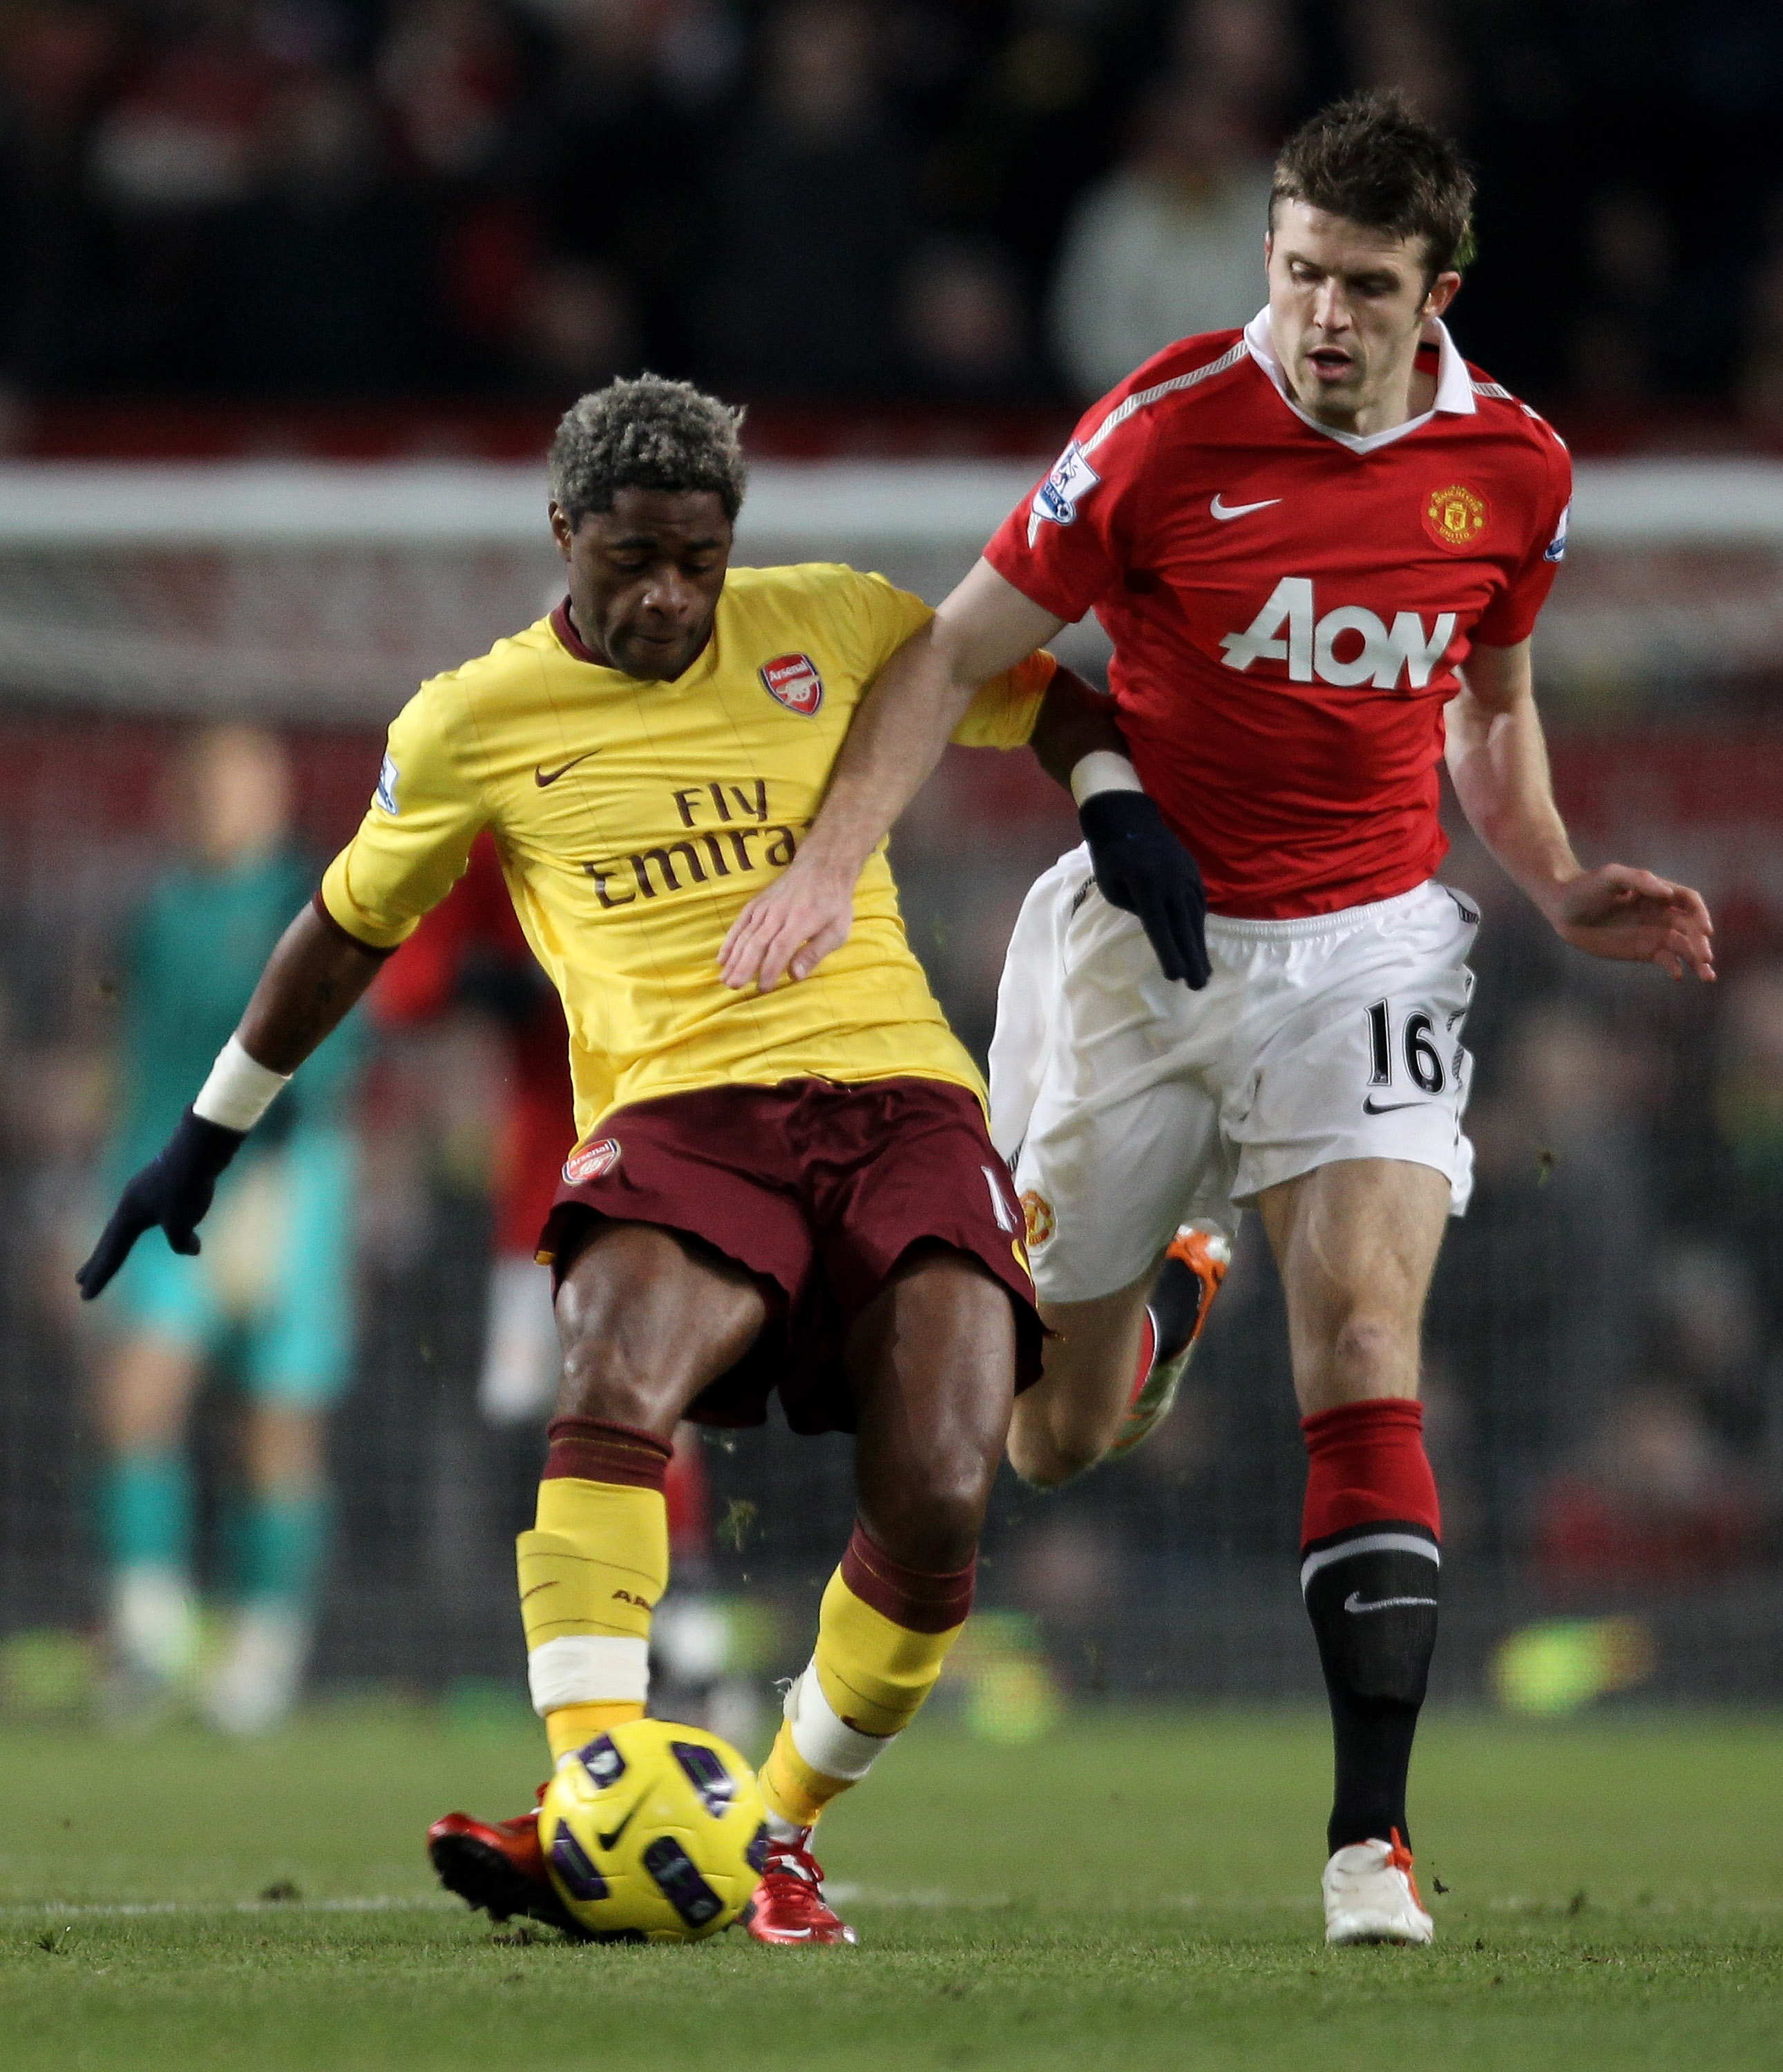 MANCHESTER, UNITED KINGDOM - DECEMBER 13:  Alexandre Song of Arsenal competes with Michael Carrick of Manchester United during the Barclays Premier League match between Manchester United and Arsenal at Old Trafford on December 13, 2010 in Manchester, Engl